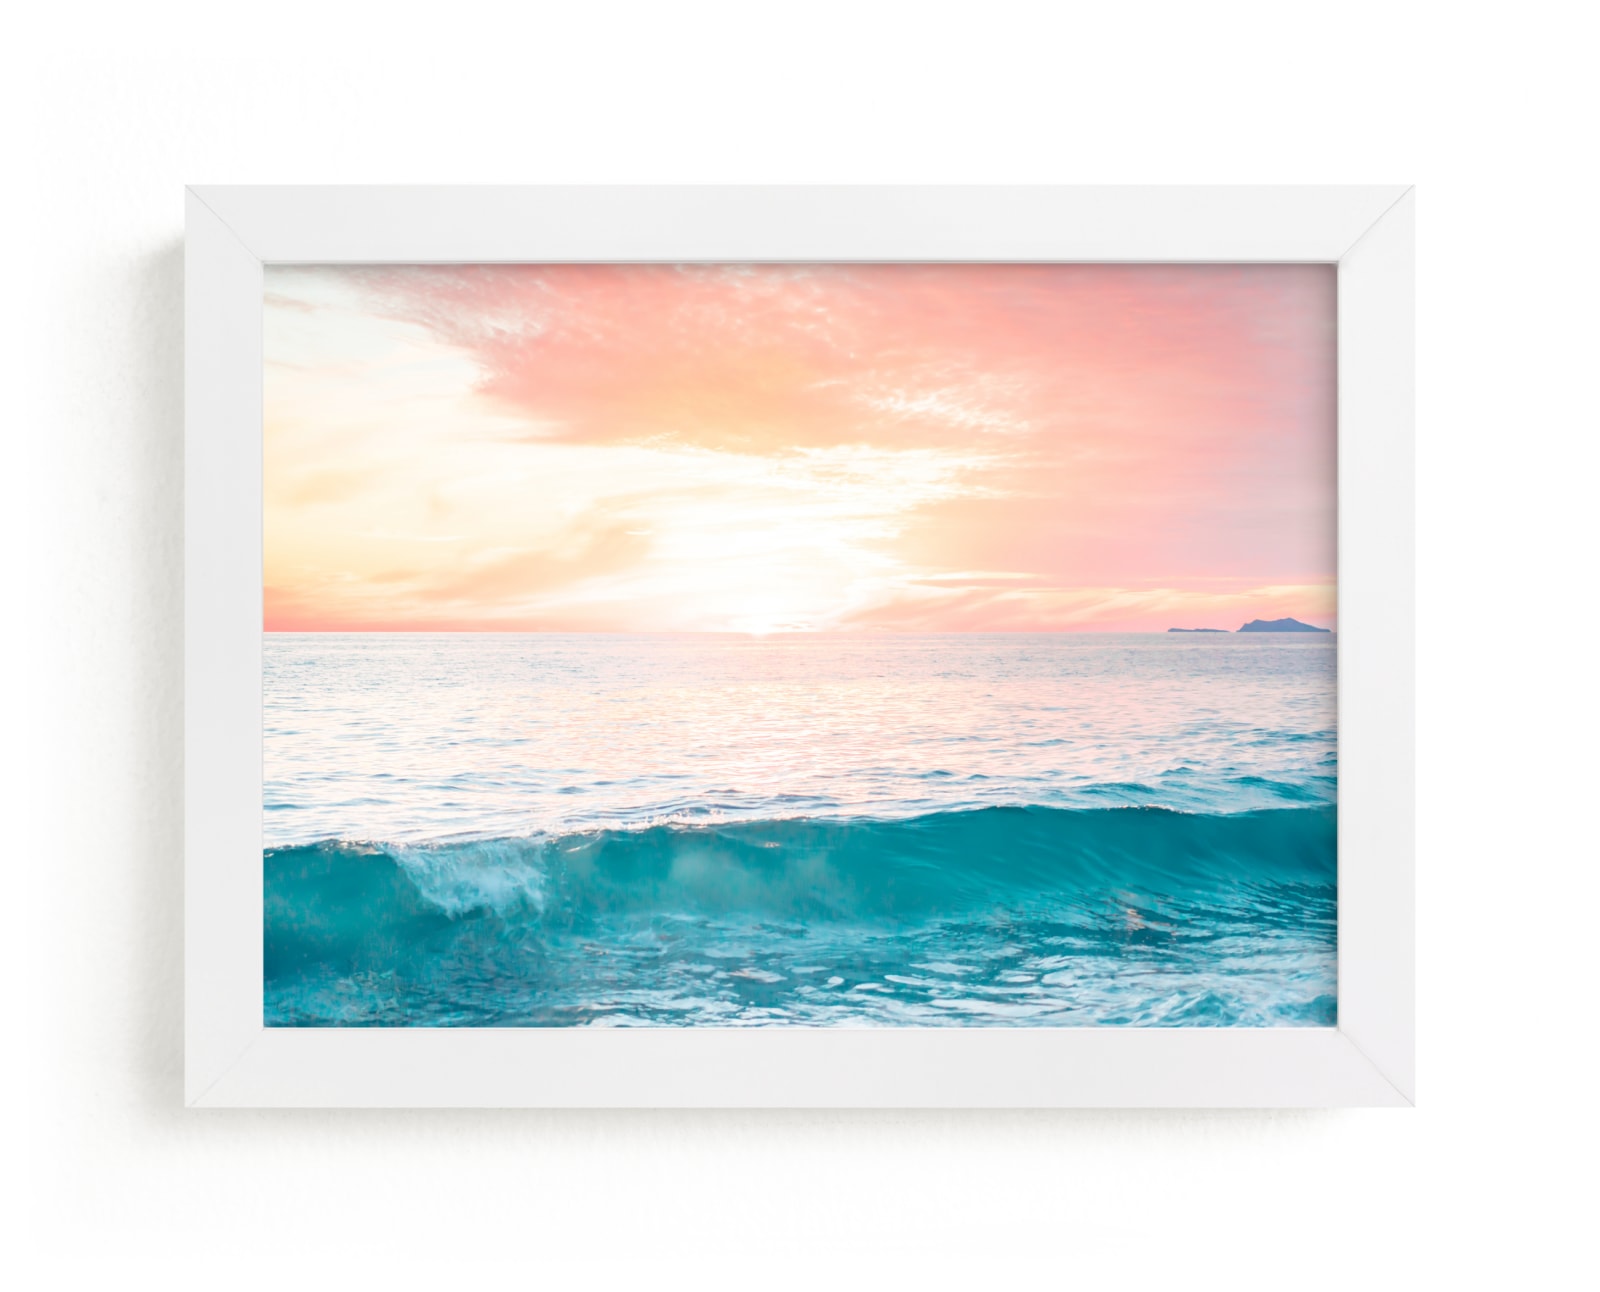 "SoCal Sorbet 3" - Art Print by Kamala Nahas in beautiful frame options and a variety of sizes.